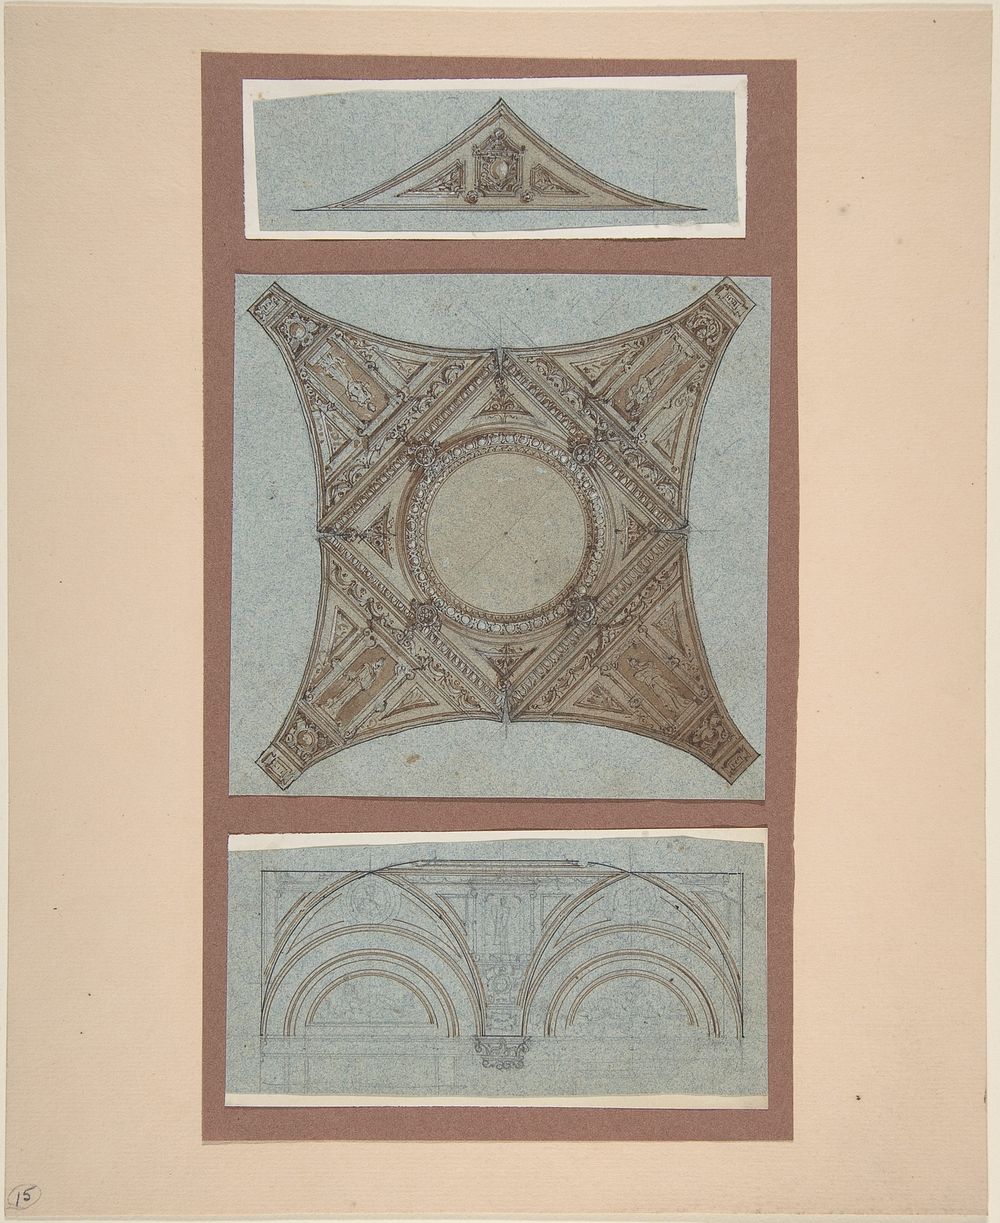 Designs for Decoration of Vaults, Anonymous, French, 19th century